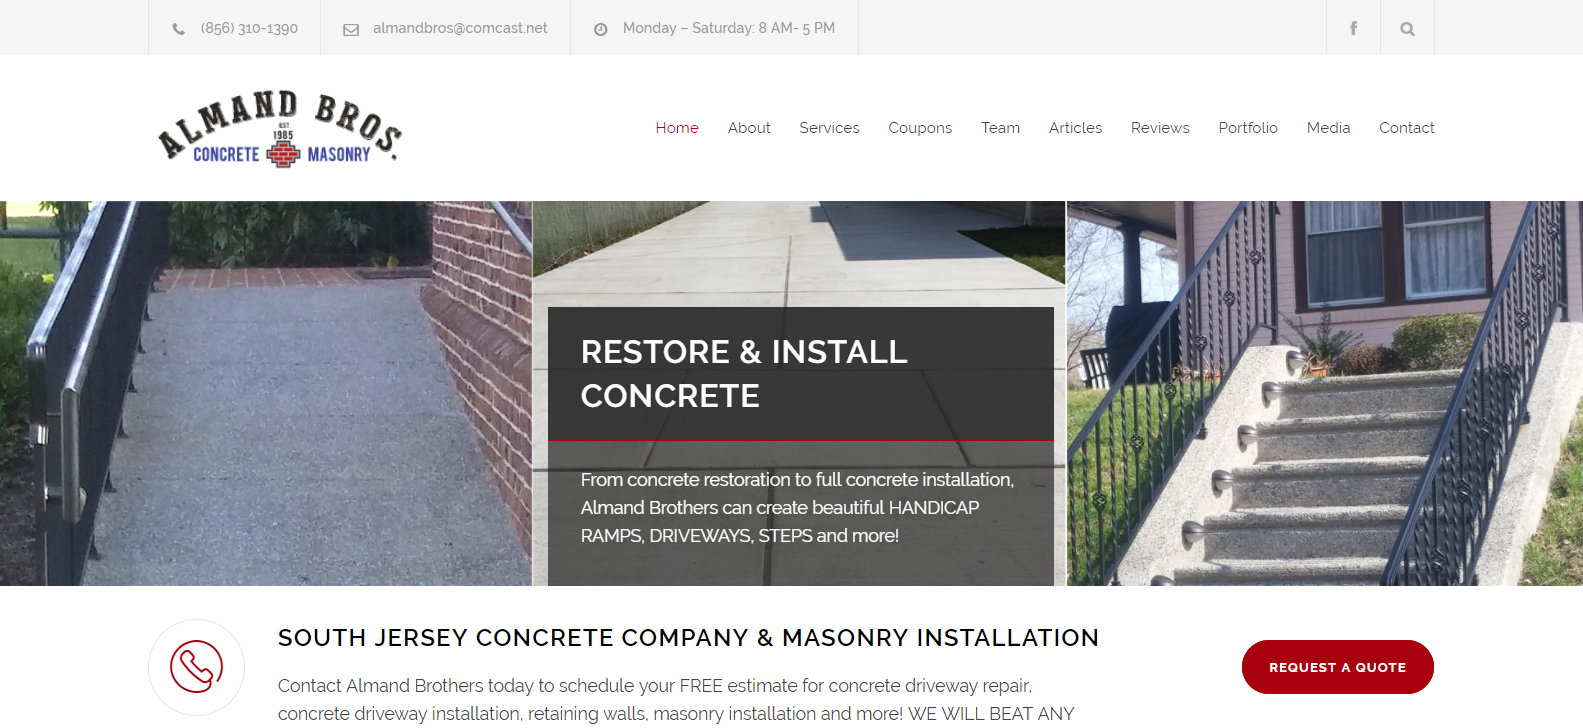 Almand Brothers South Jersey Concrete Contractor Masonry Installation Company